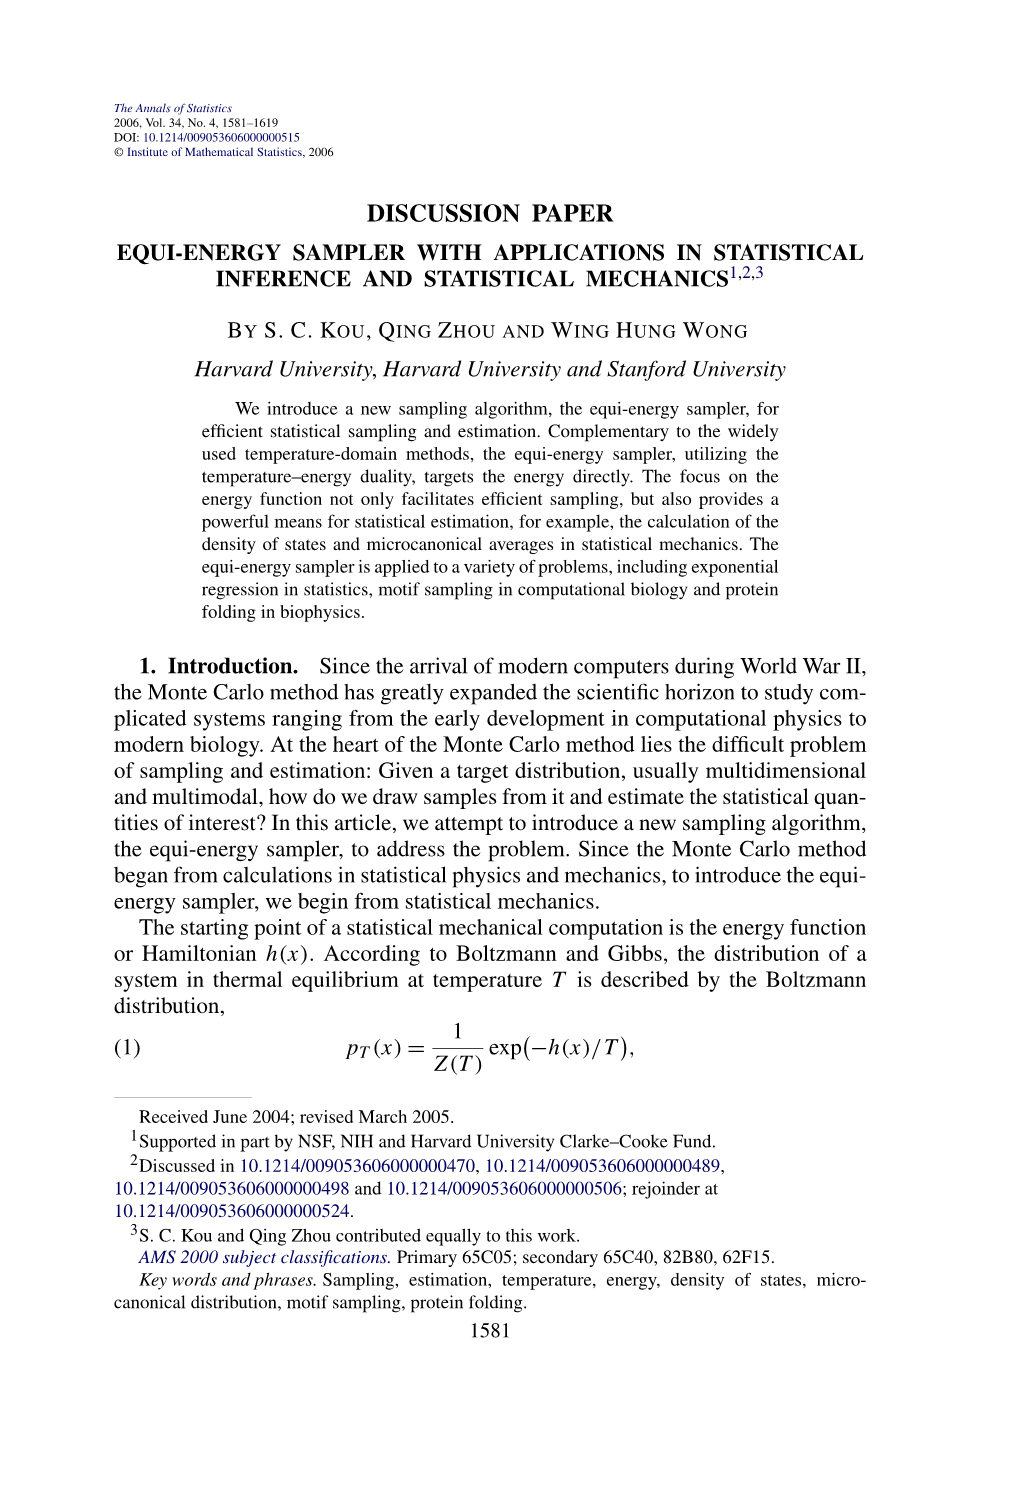 Equi-Energy Sampler with Applications in Statistical Inference and Statistical Mechanics1,2,3